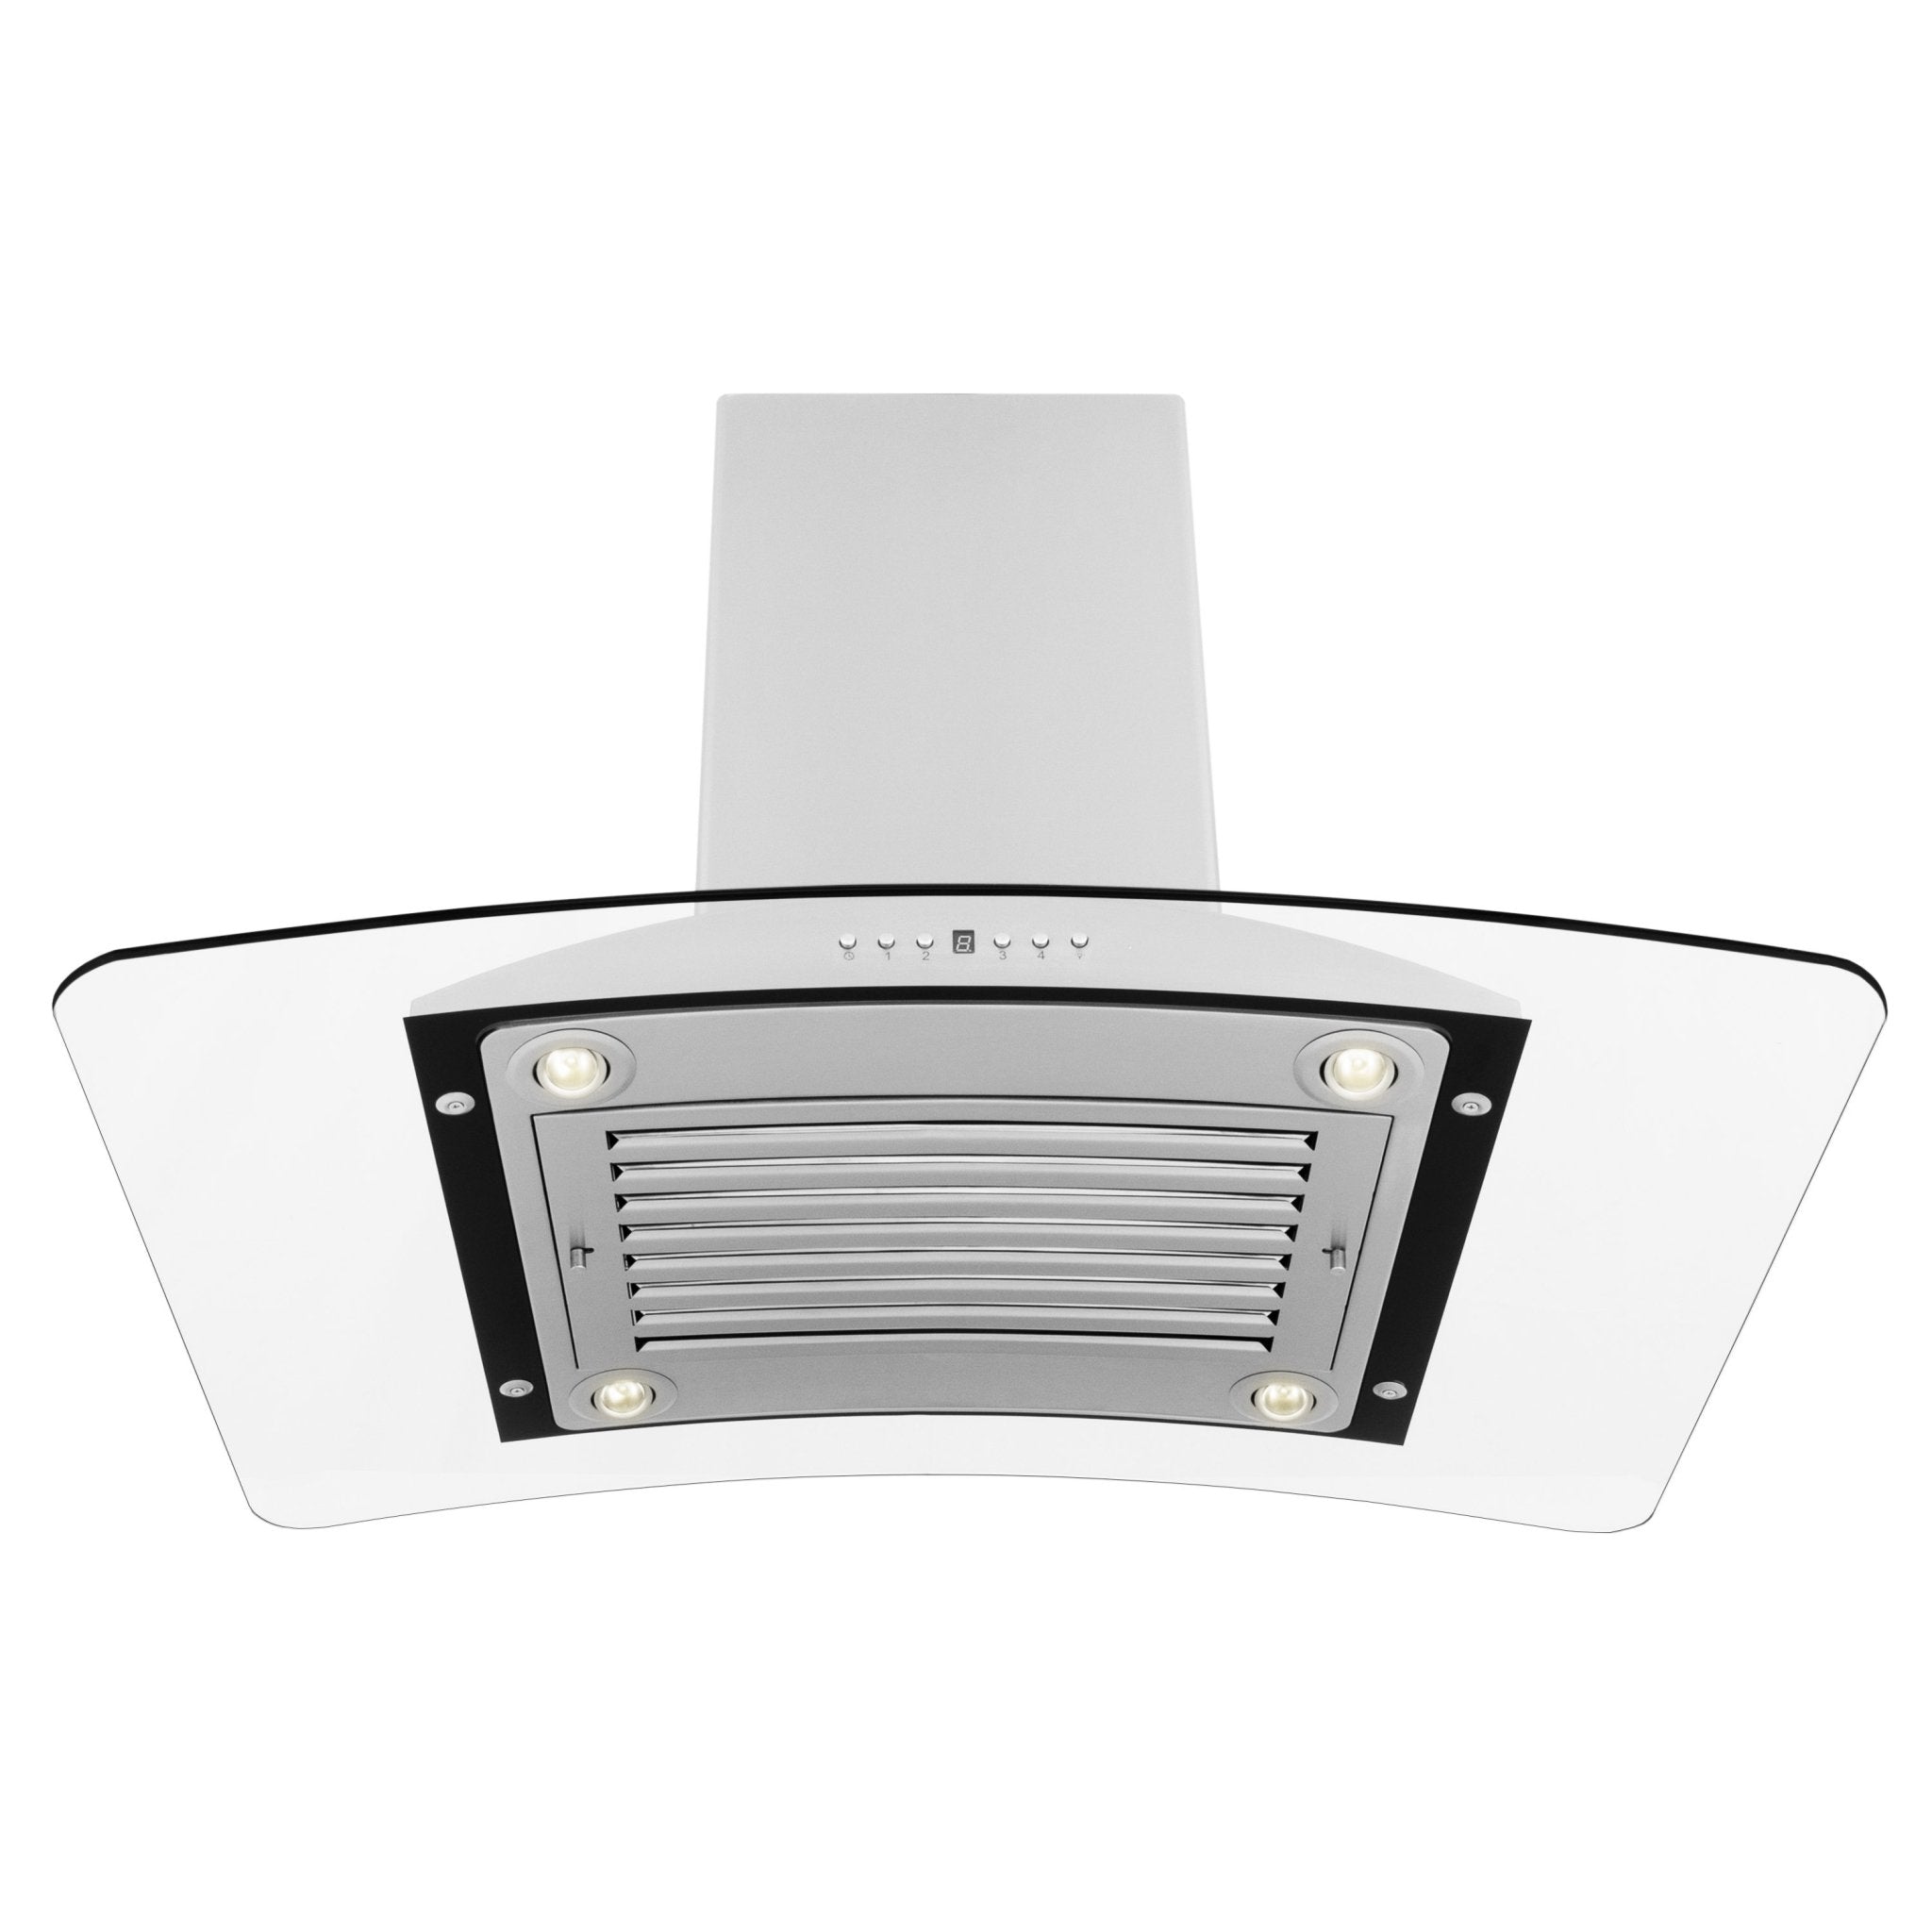 ZLINE Convertible Vent Island Mount Range Hood in Stainless Steel and Glass (GL9i) front under.